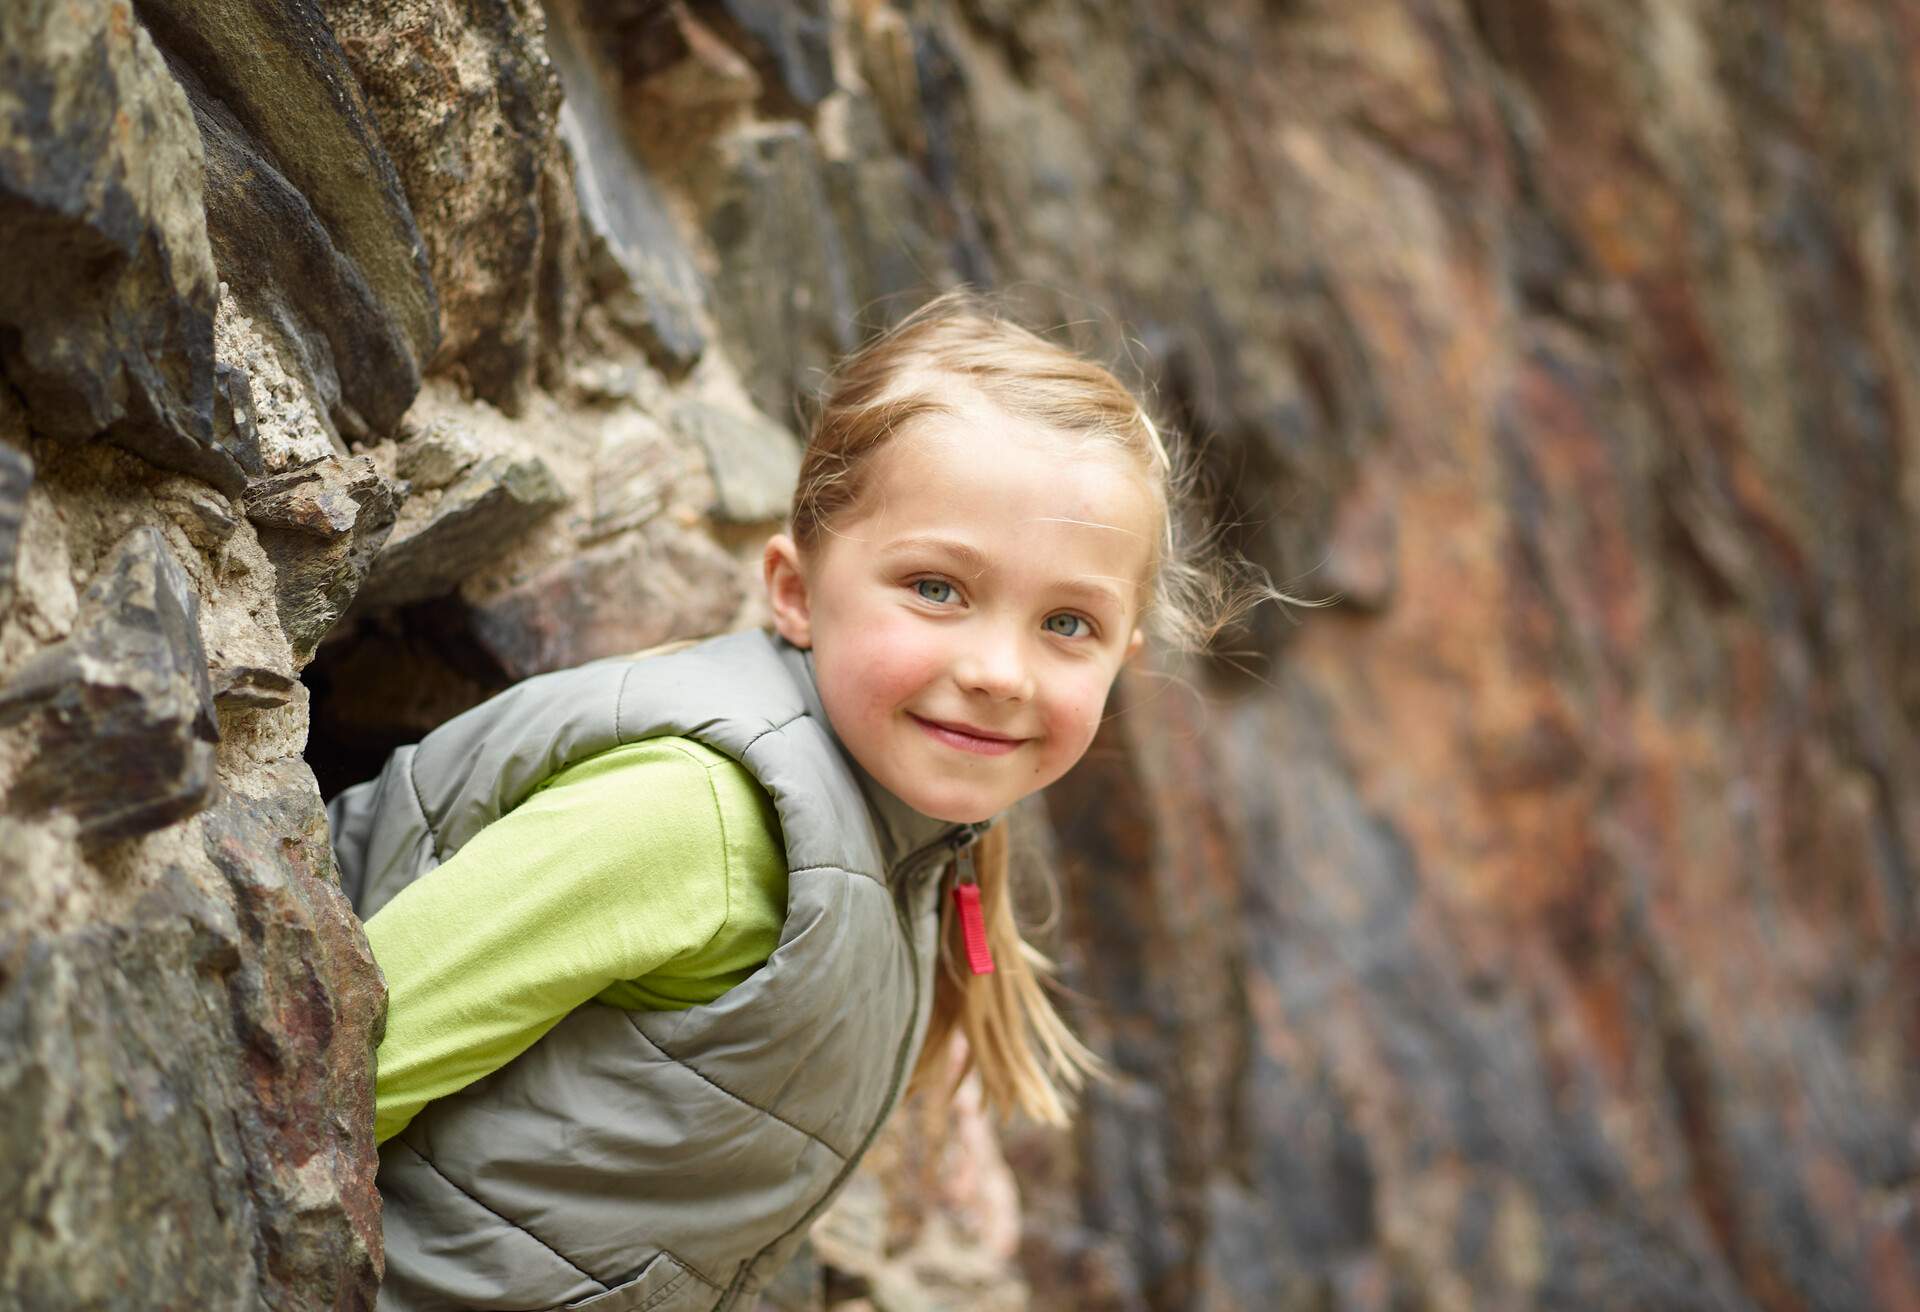 Girl smiling while looking out from cave in mountain.